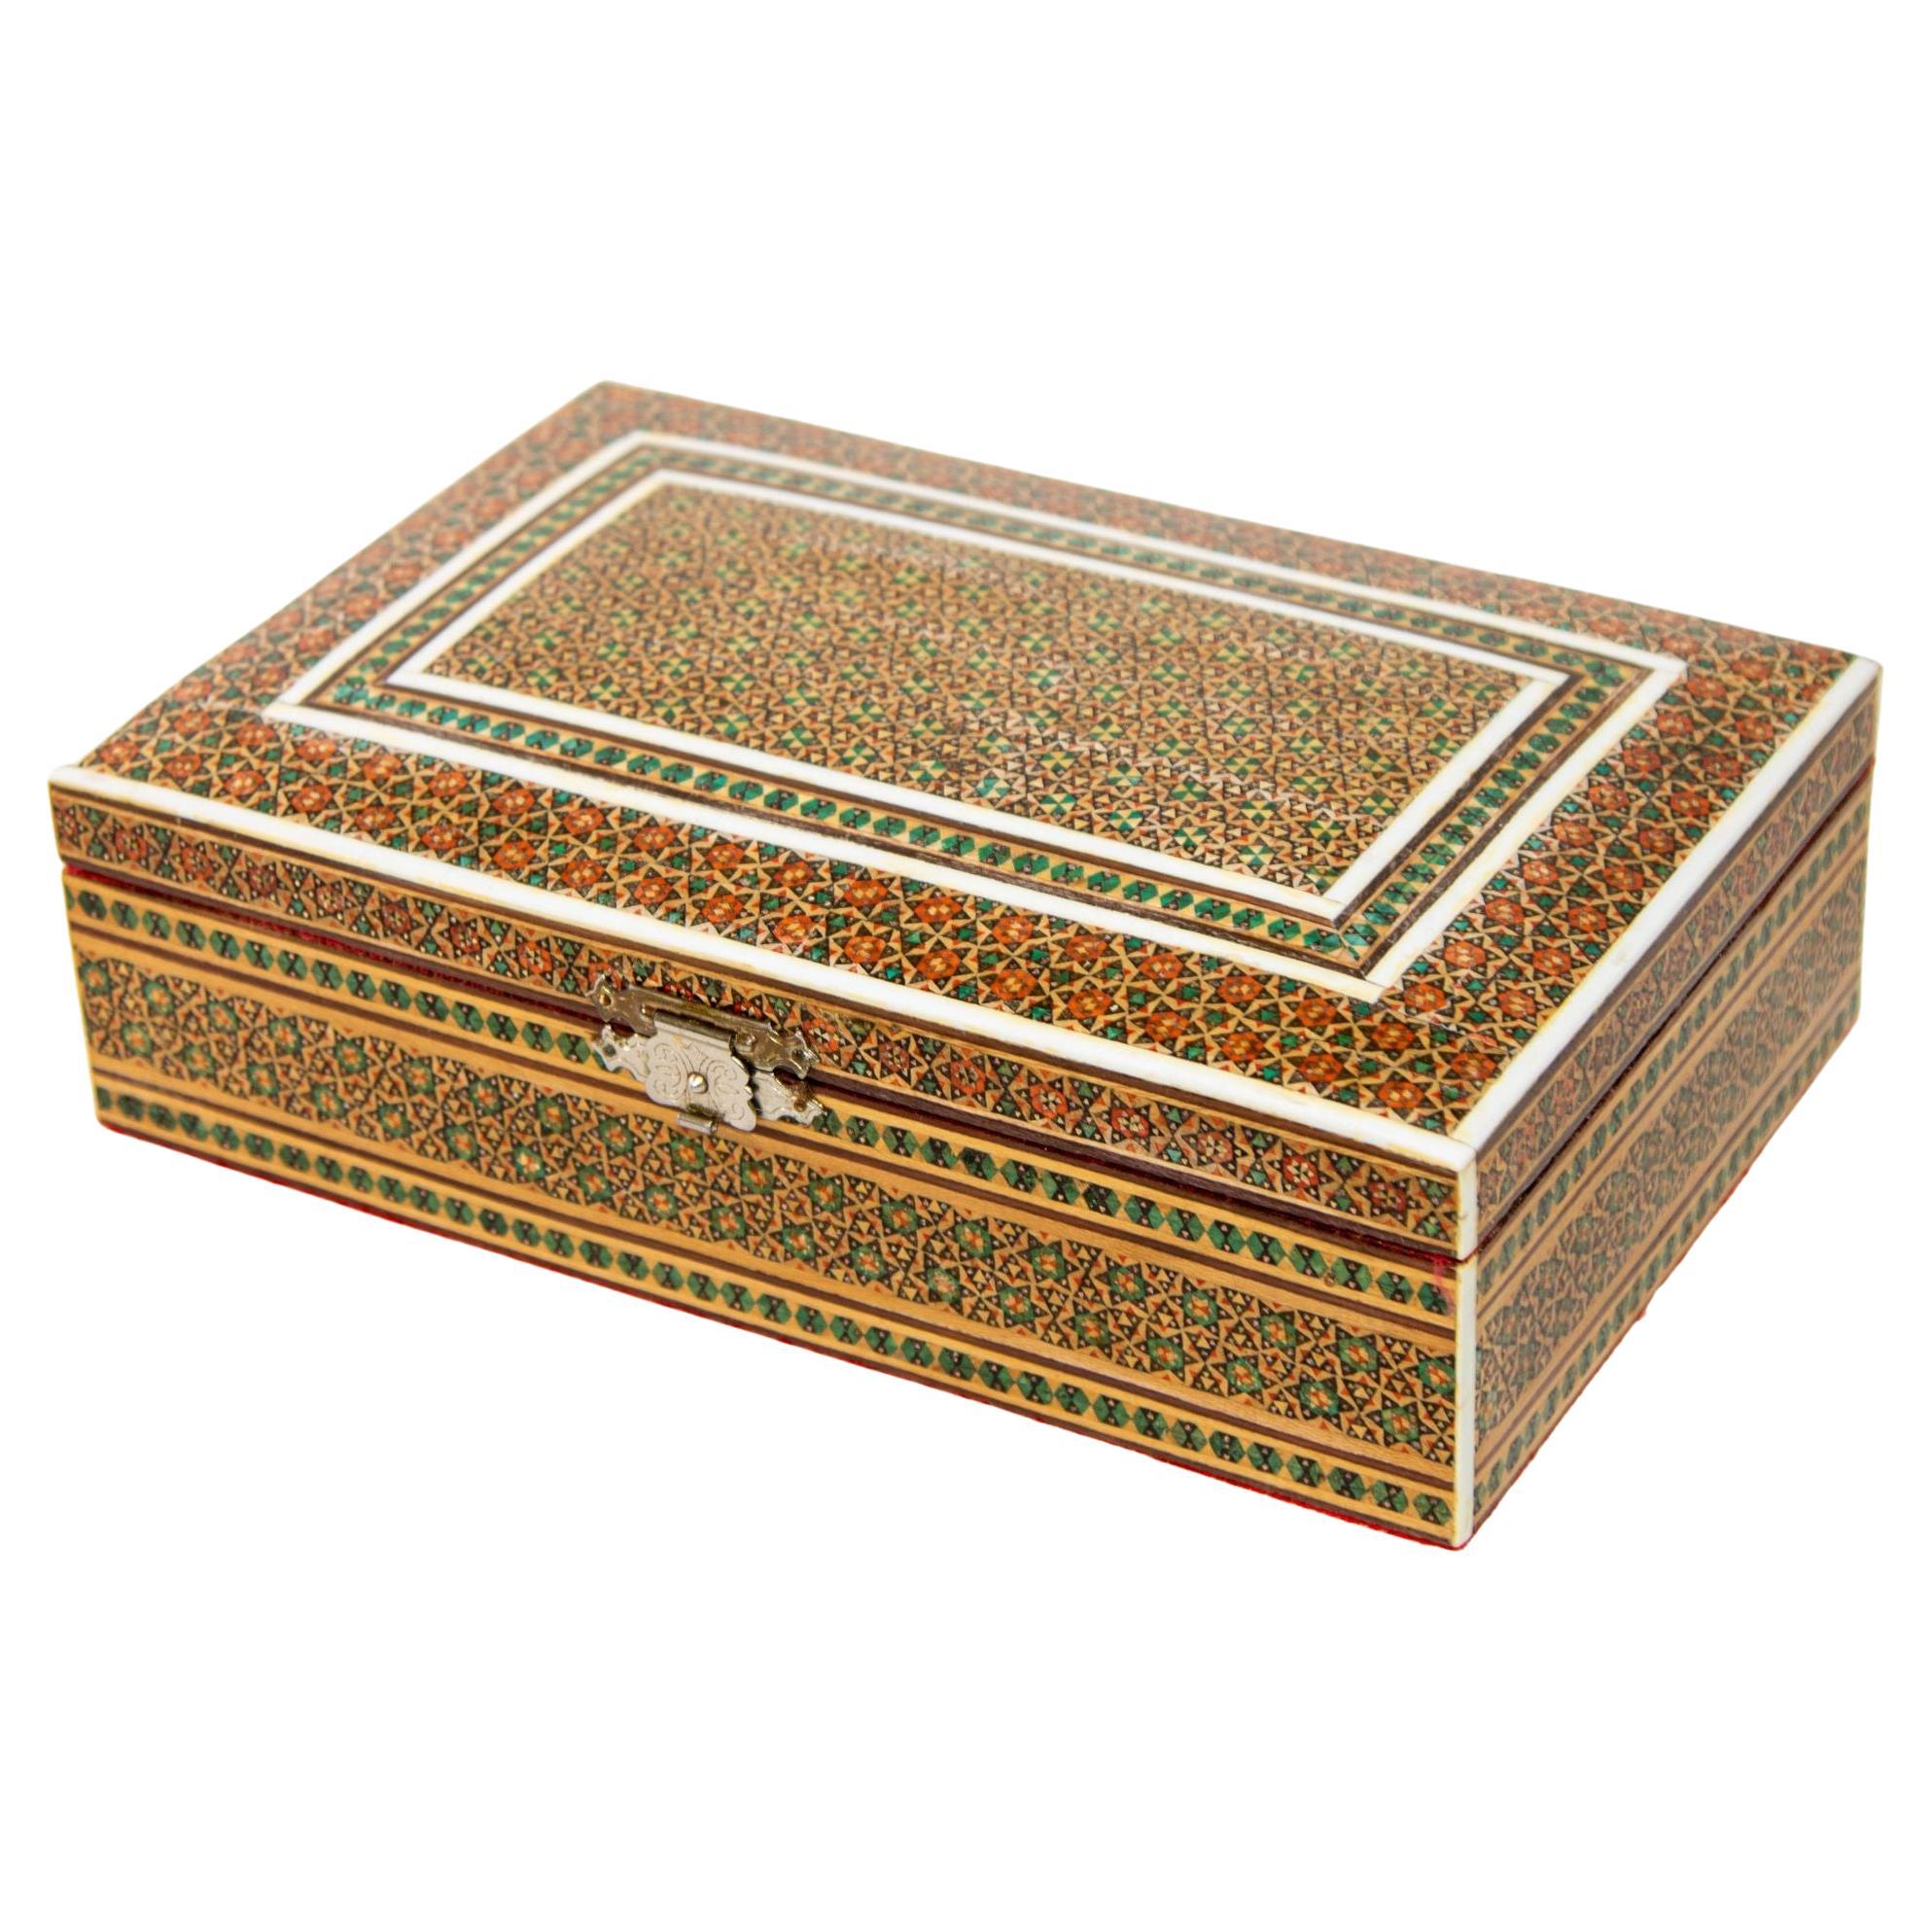 Middle Eastern Persian Micro Mosaic Khatam Inlaid Jewelry Box For Sale